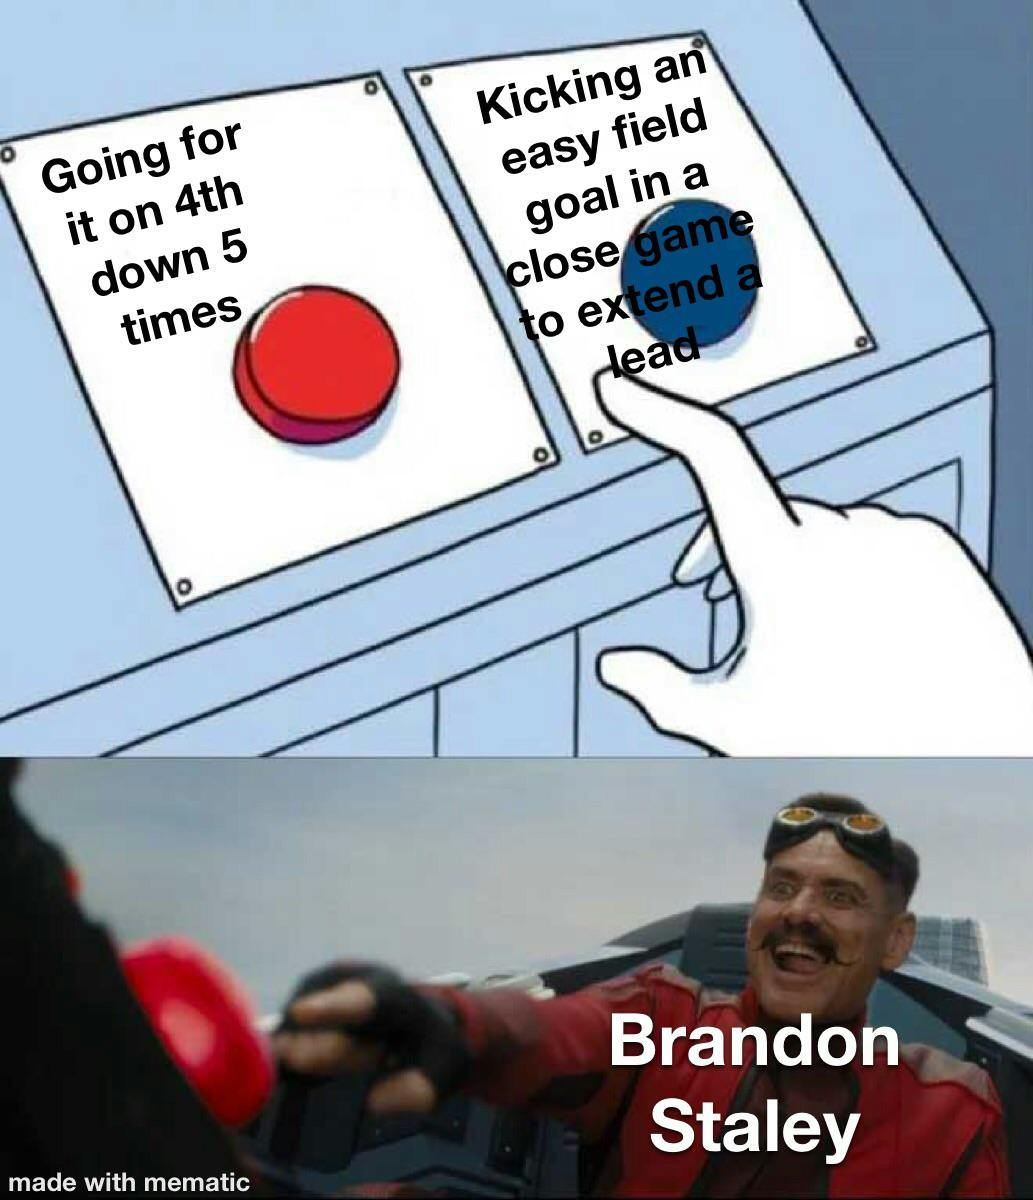 Brandon Staley sucks. Decentralized team ownership fixes this!